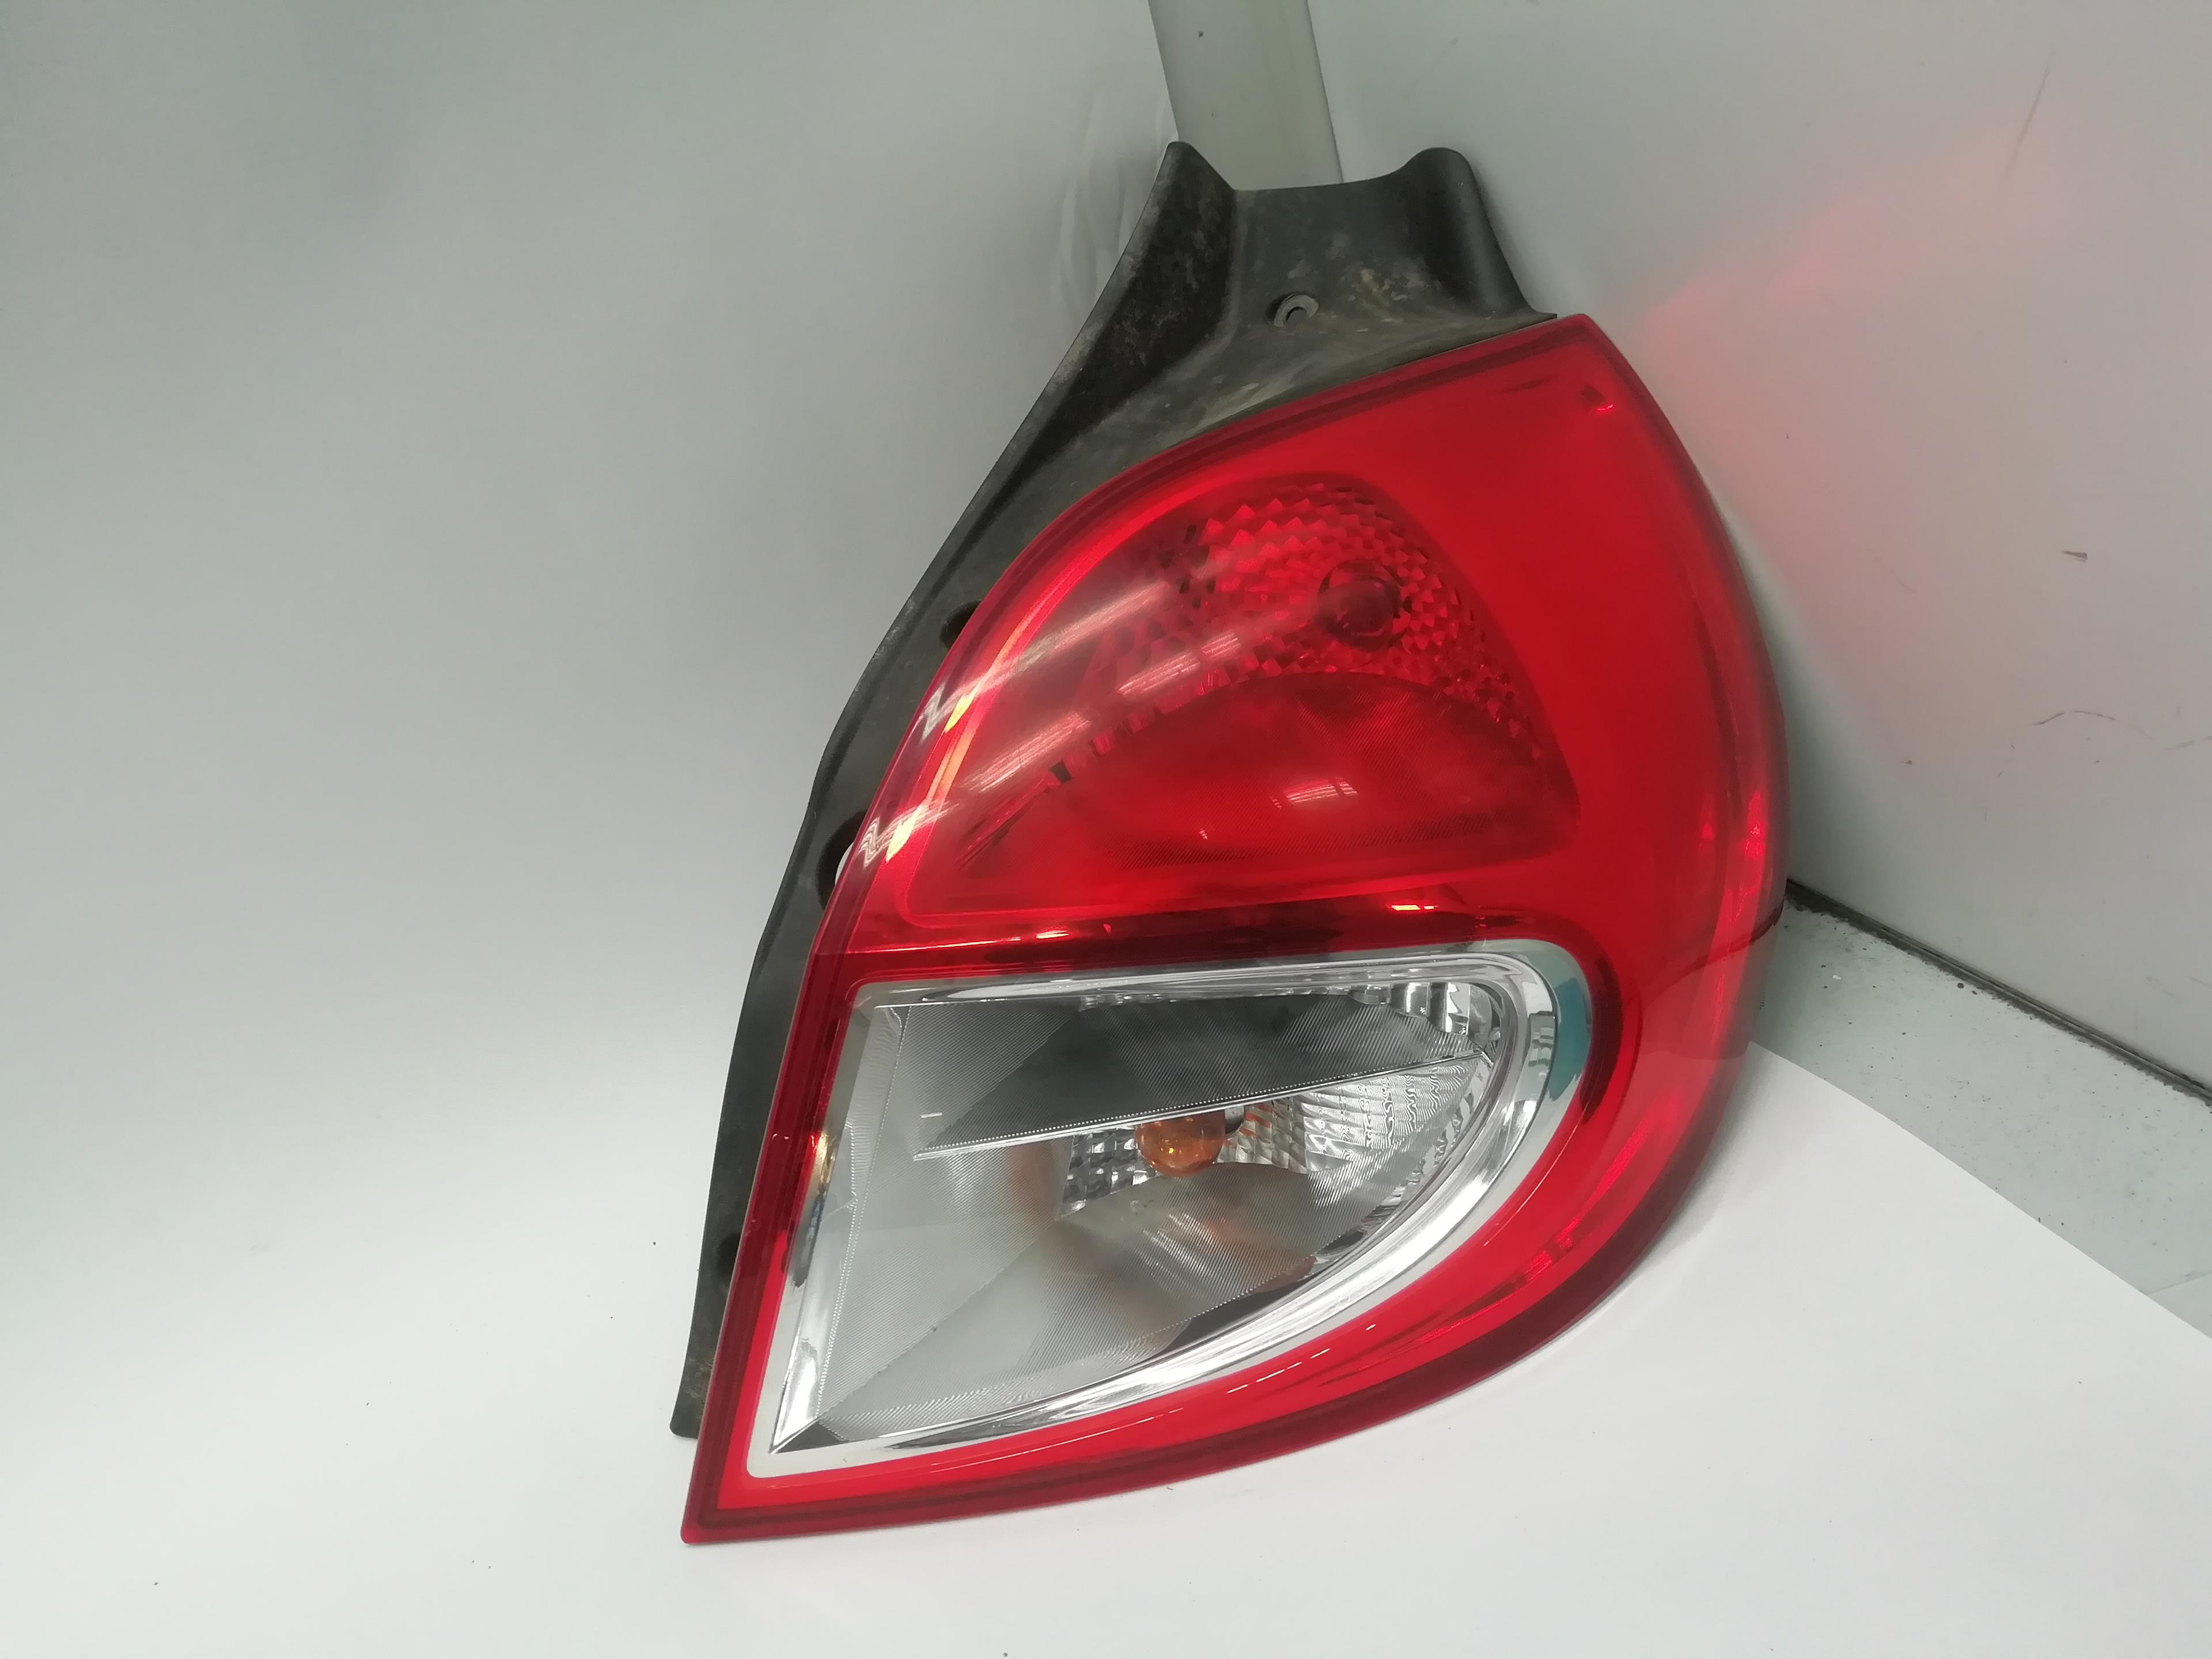 RENAULT Clio 3 generation (2005-2012) Rear Right Taillight Lamp 8200886946, 8200886946 24018650